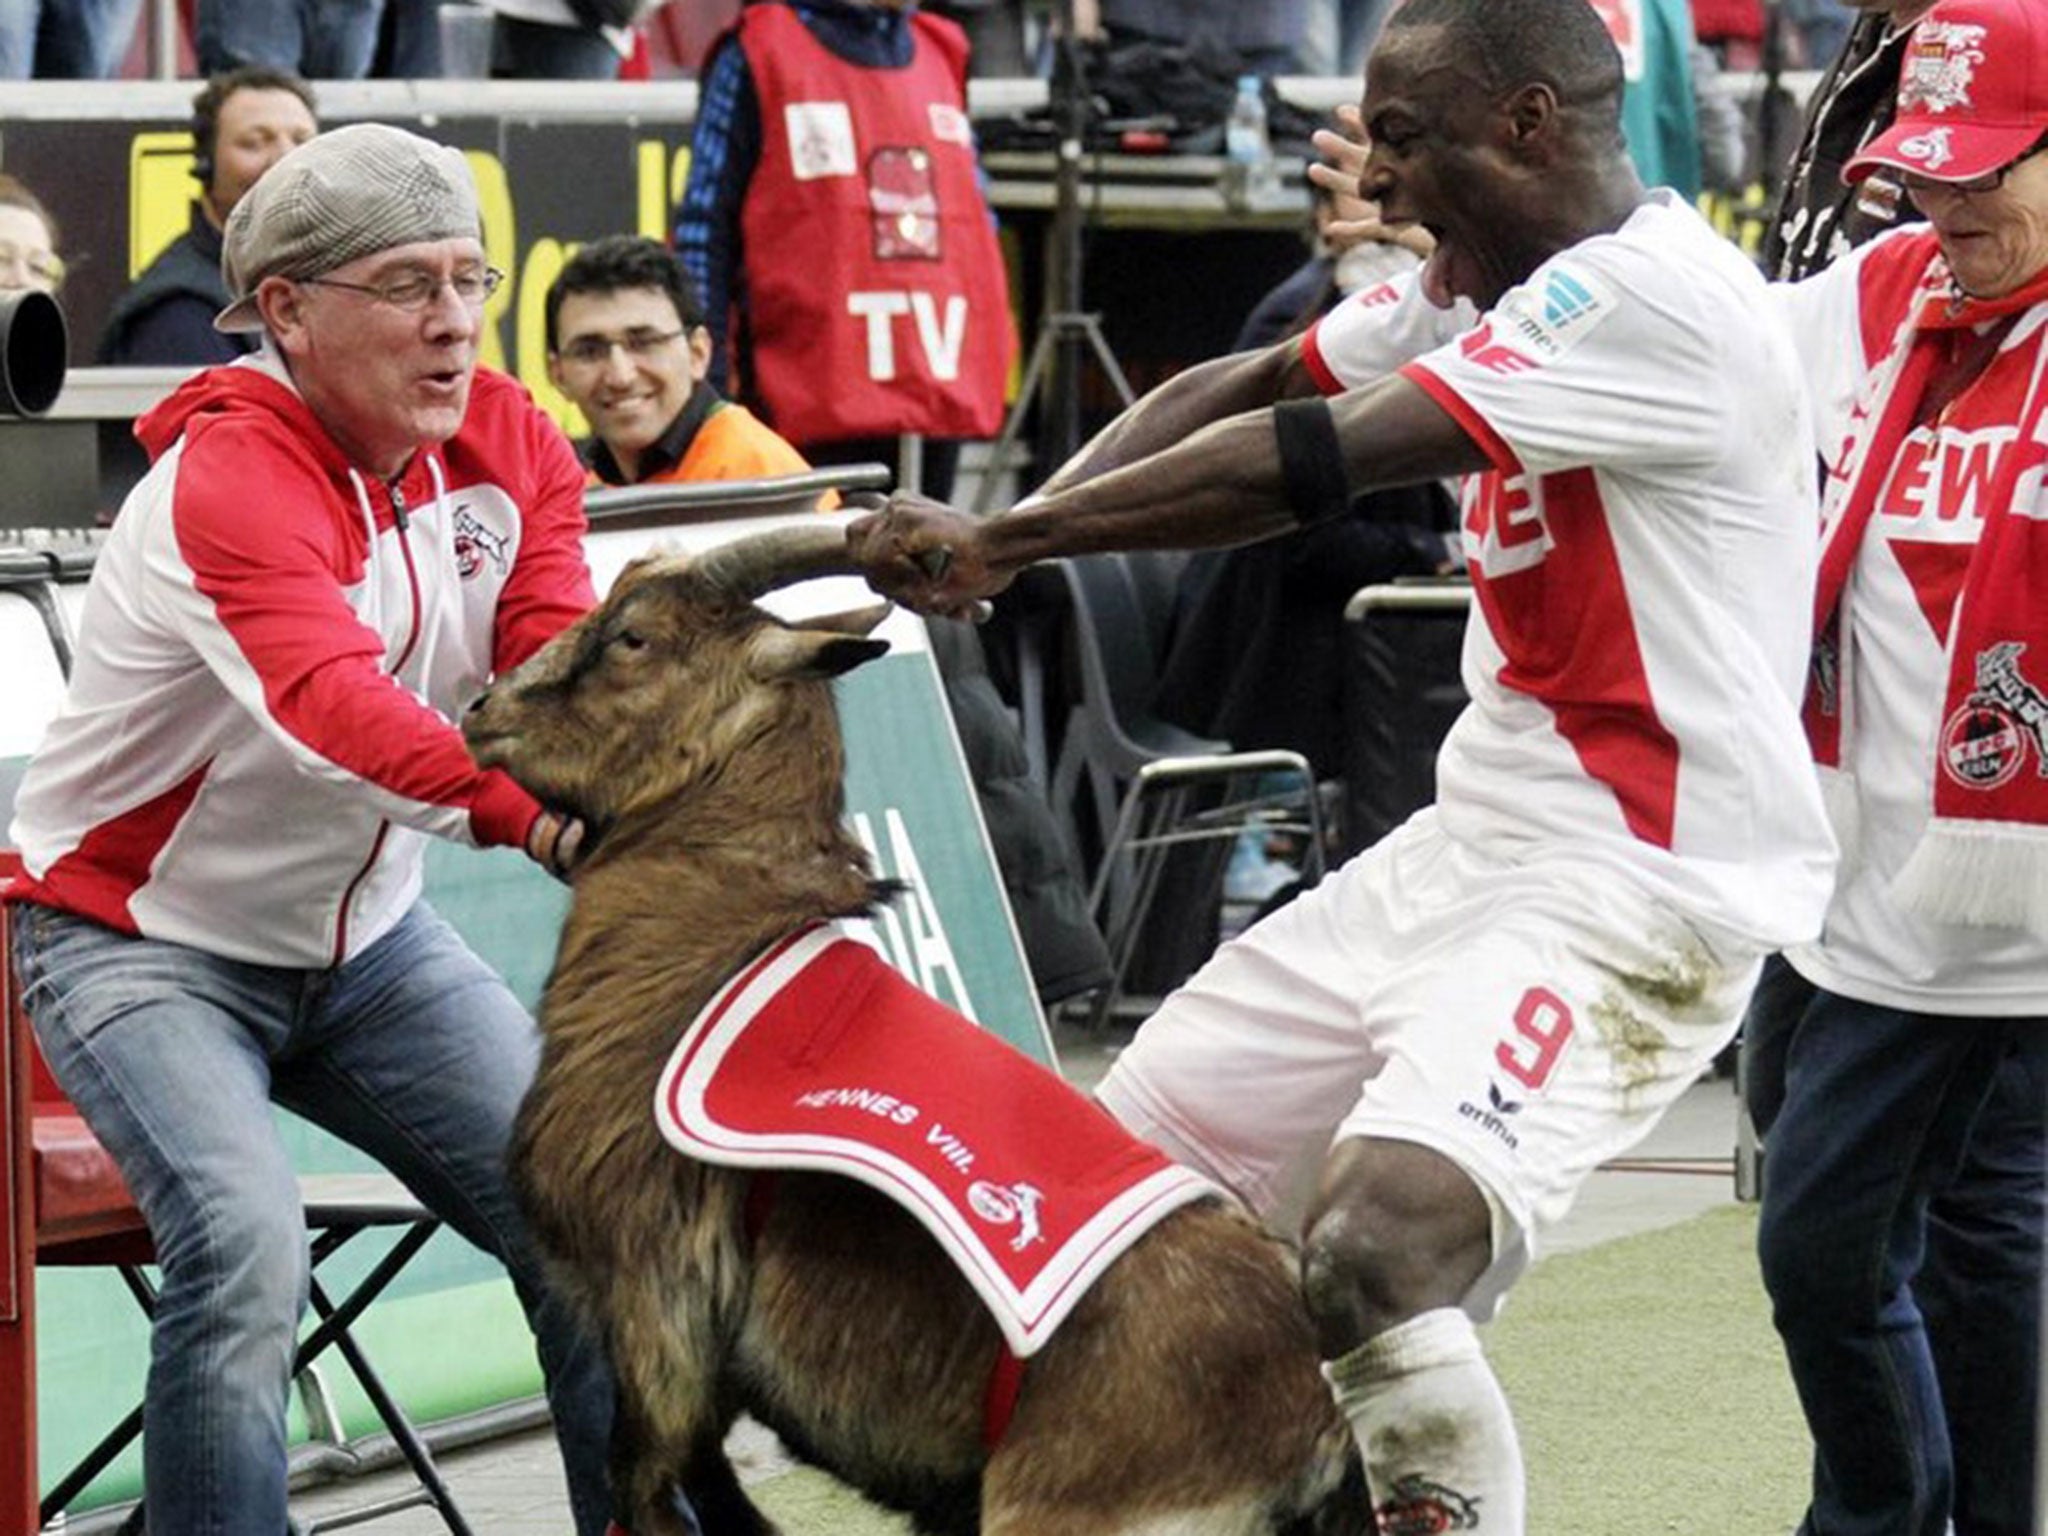 Anthony Ujah celebrates with Hennes the goat